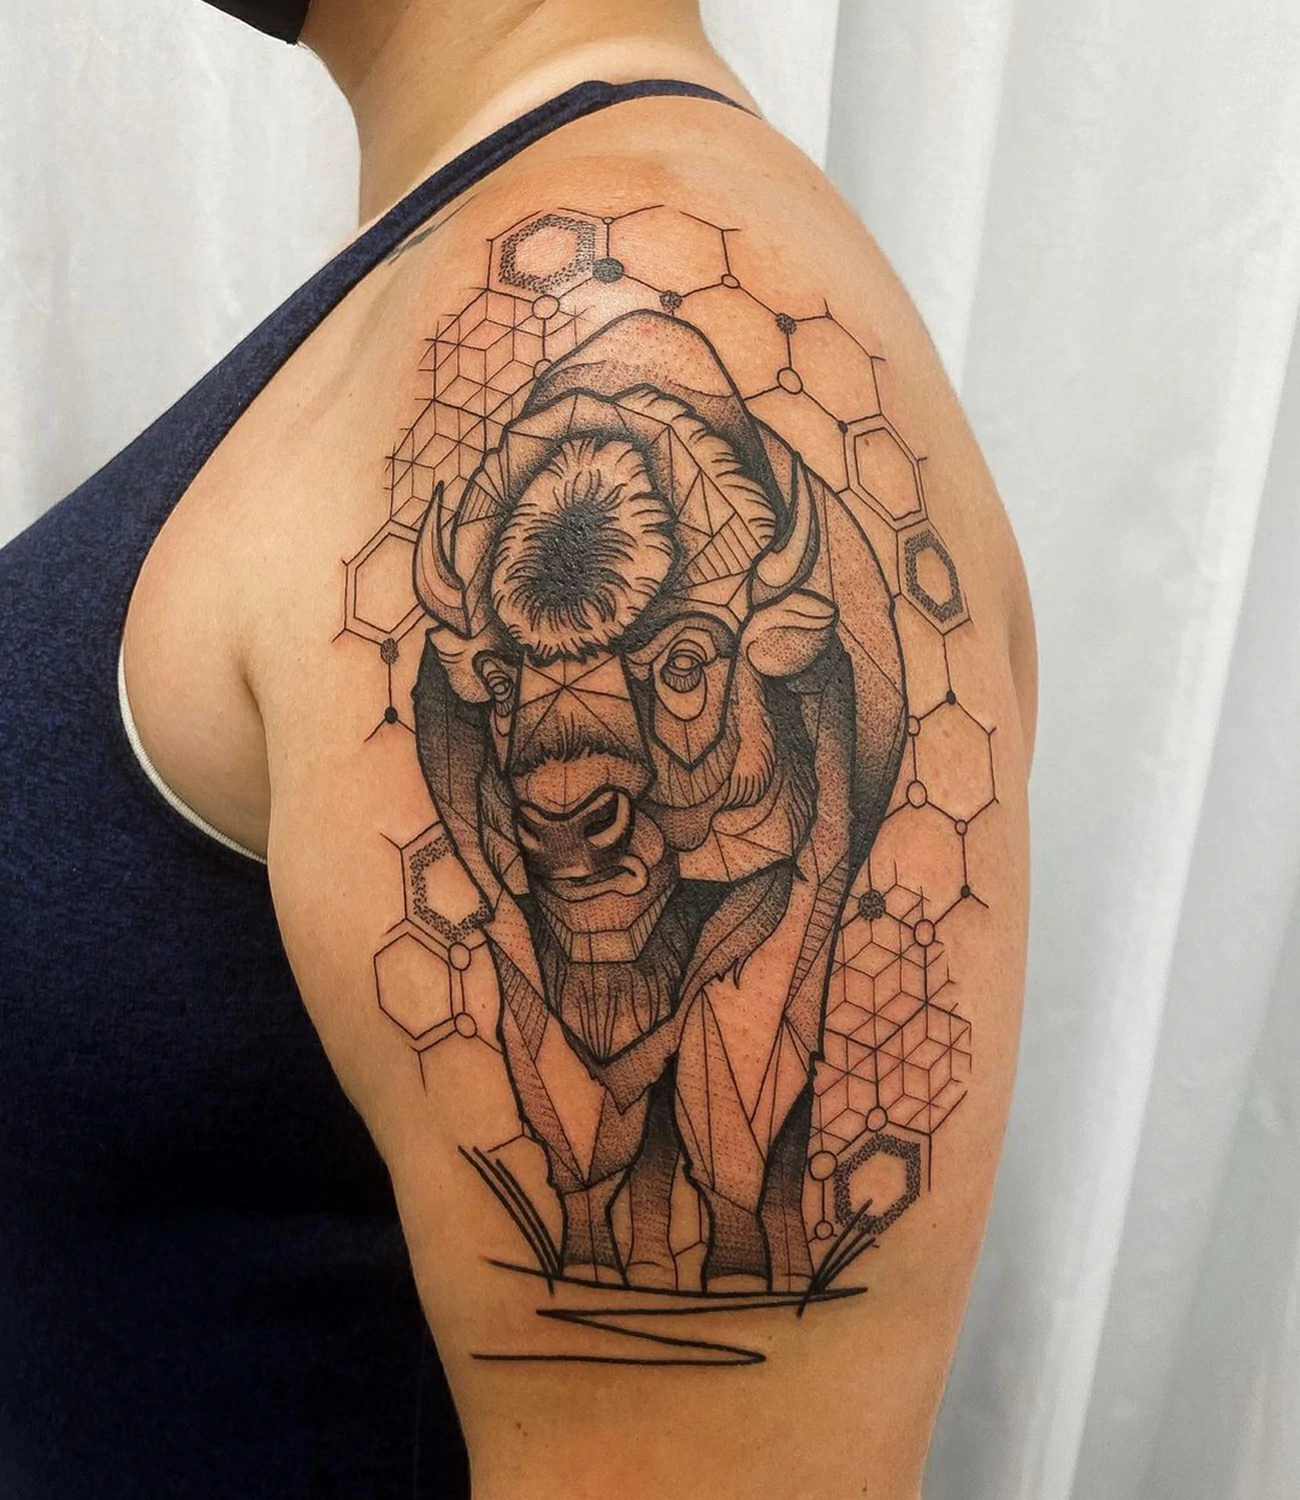 Geometric Animal Tattoos: Geometric animal tattoos combine various animal forms with precise geometric shapes, reflecting the beauty and intricacy of the animal kingdom.